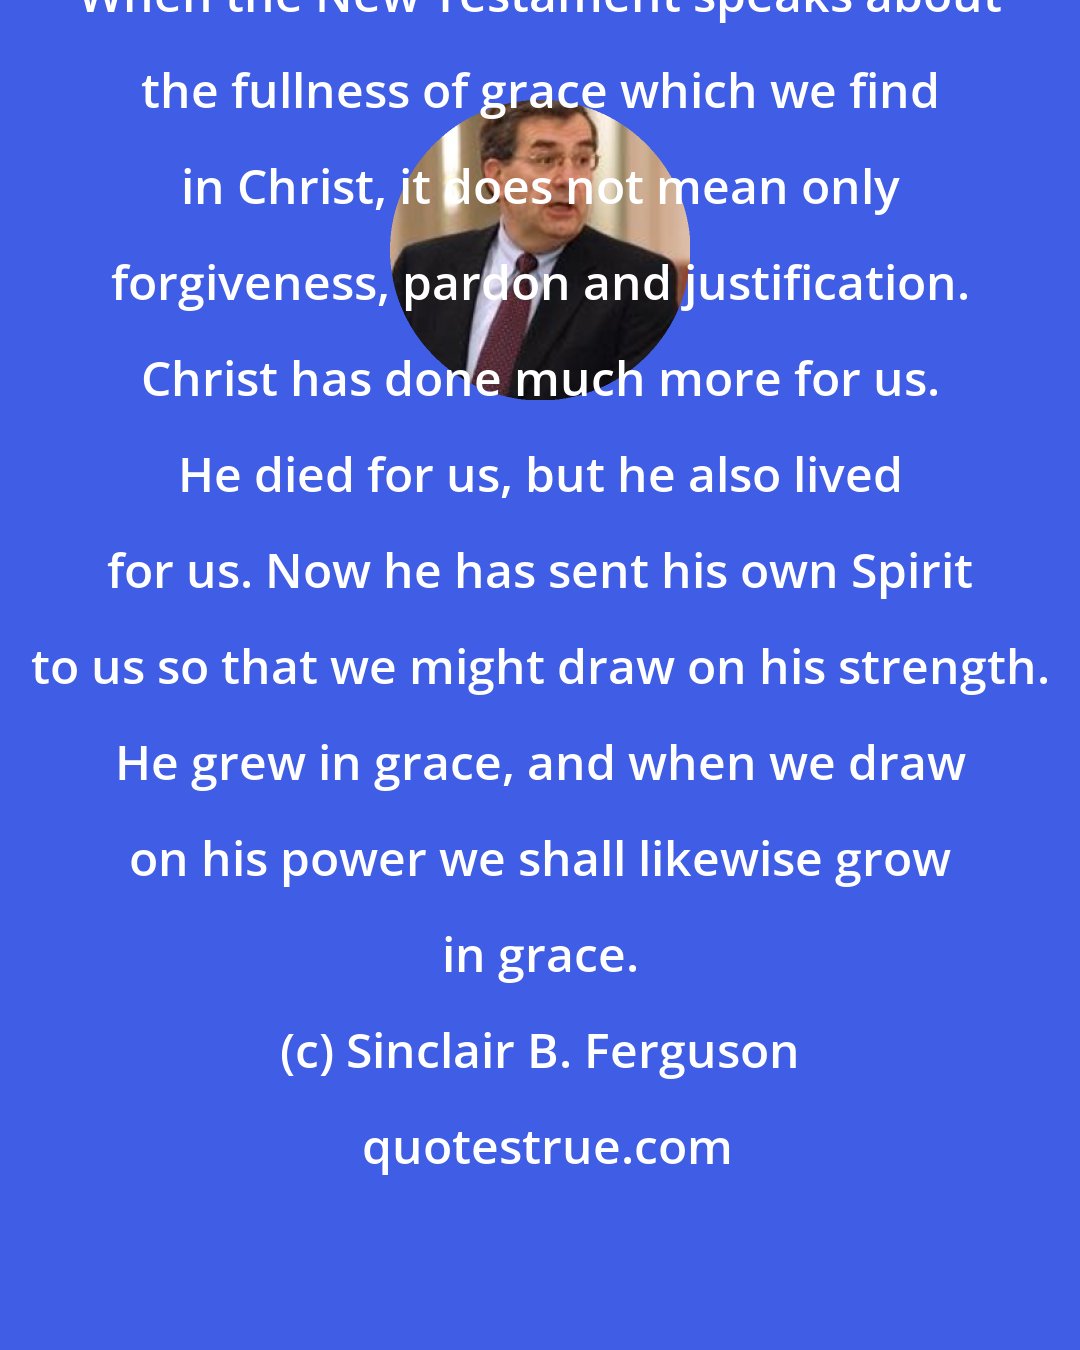 Sinclair B. Ferguson: When the New Testament speaks about the fullness of grace which we find in Christ, it does not mean only forgiveness, pardon and justification. Christ has done much more for us. He died for us, but he also lived for us. Now he has sent his own Spirit to us so that we might draw on his strength. He grew in grace, and when we draw on his power we shall likewise grow in grace.